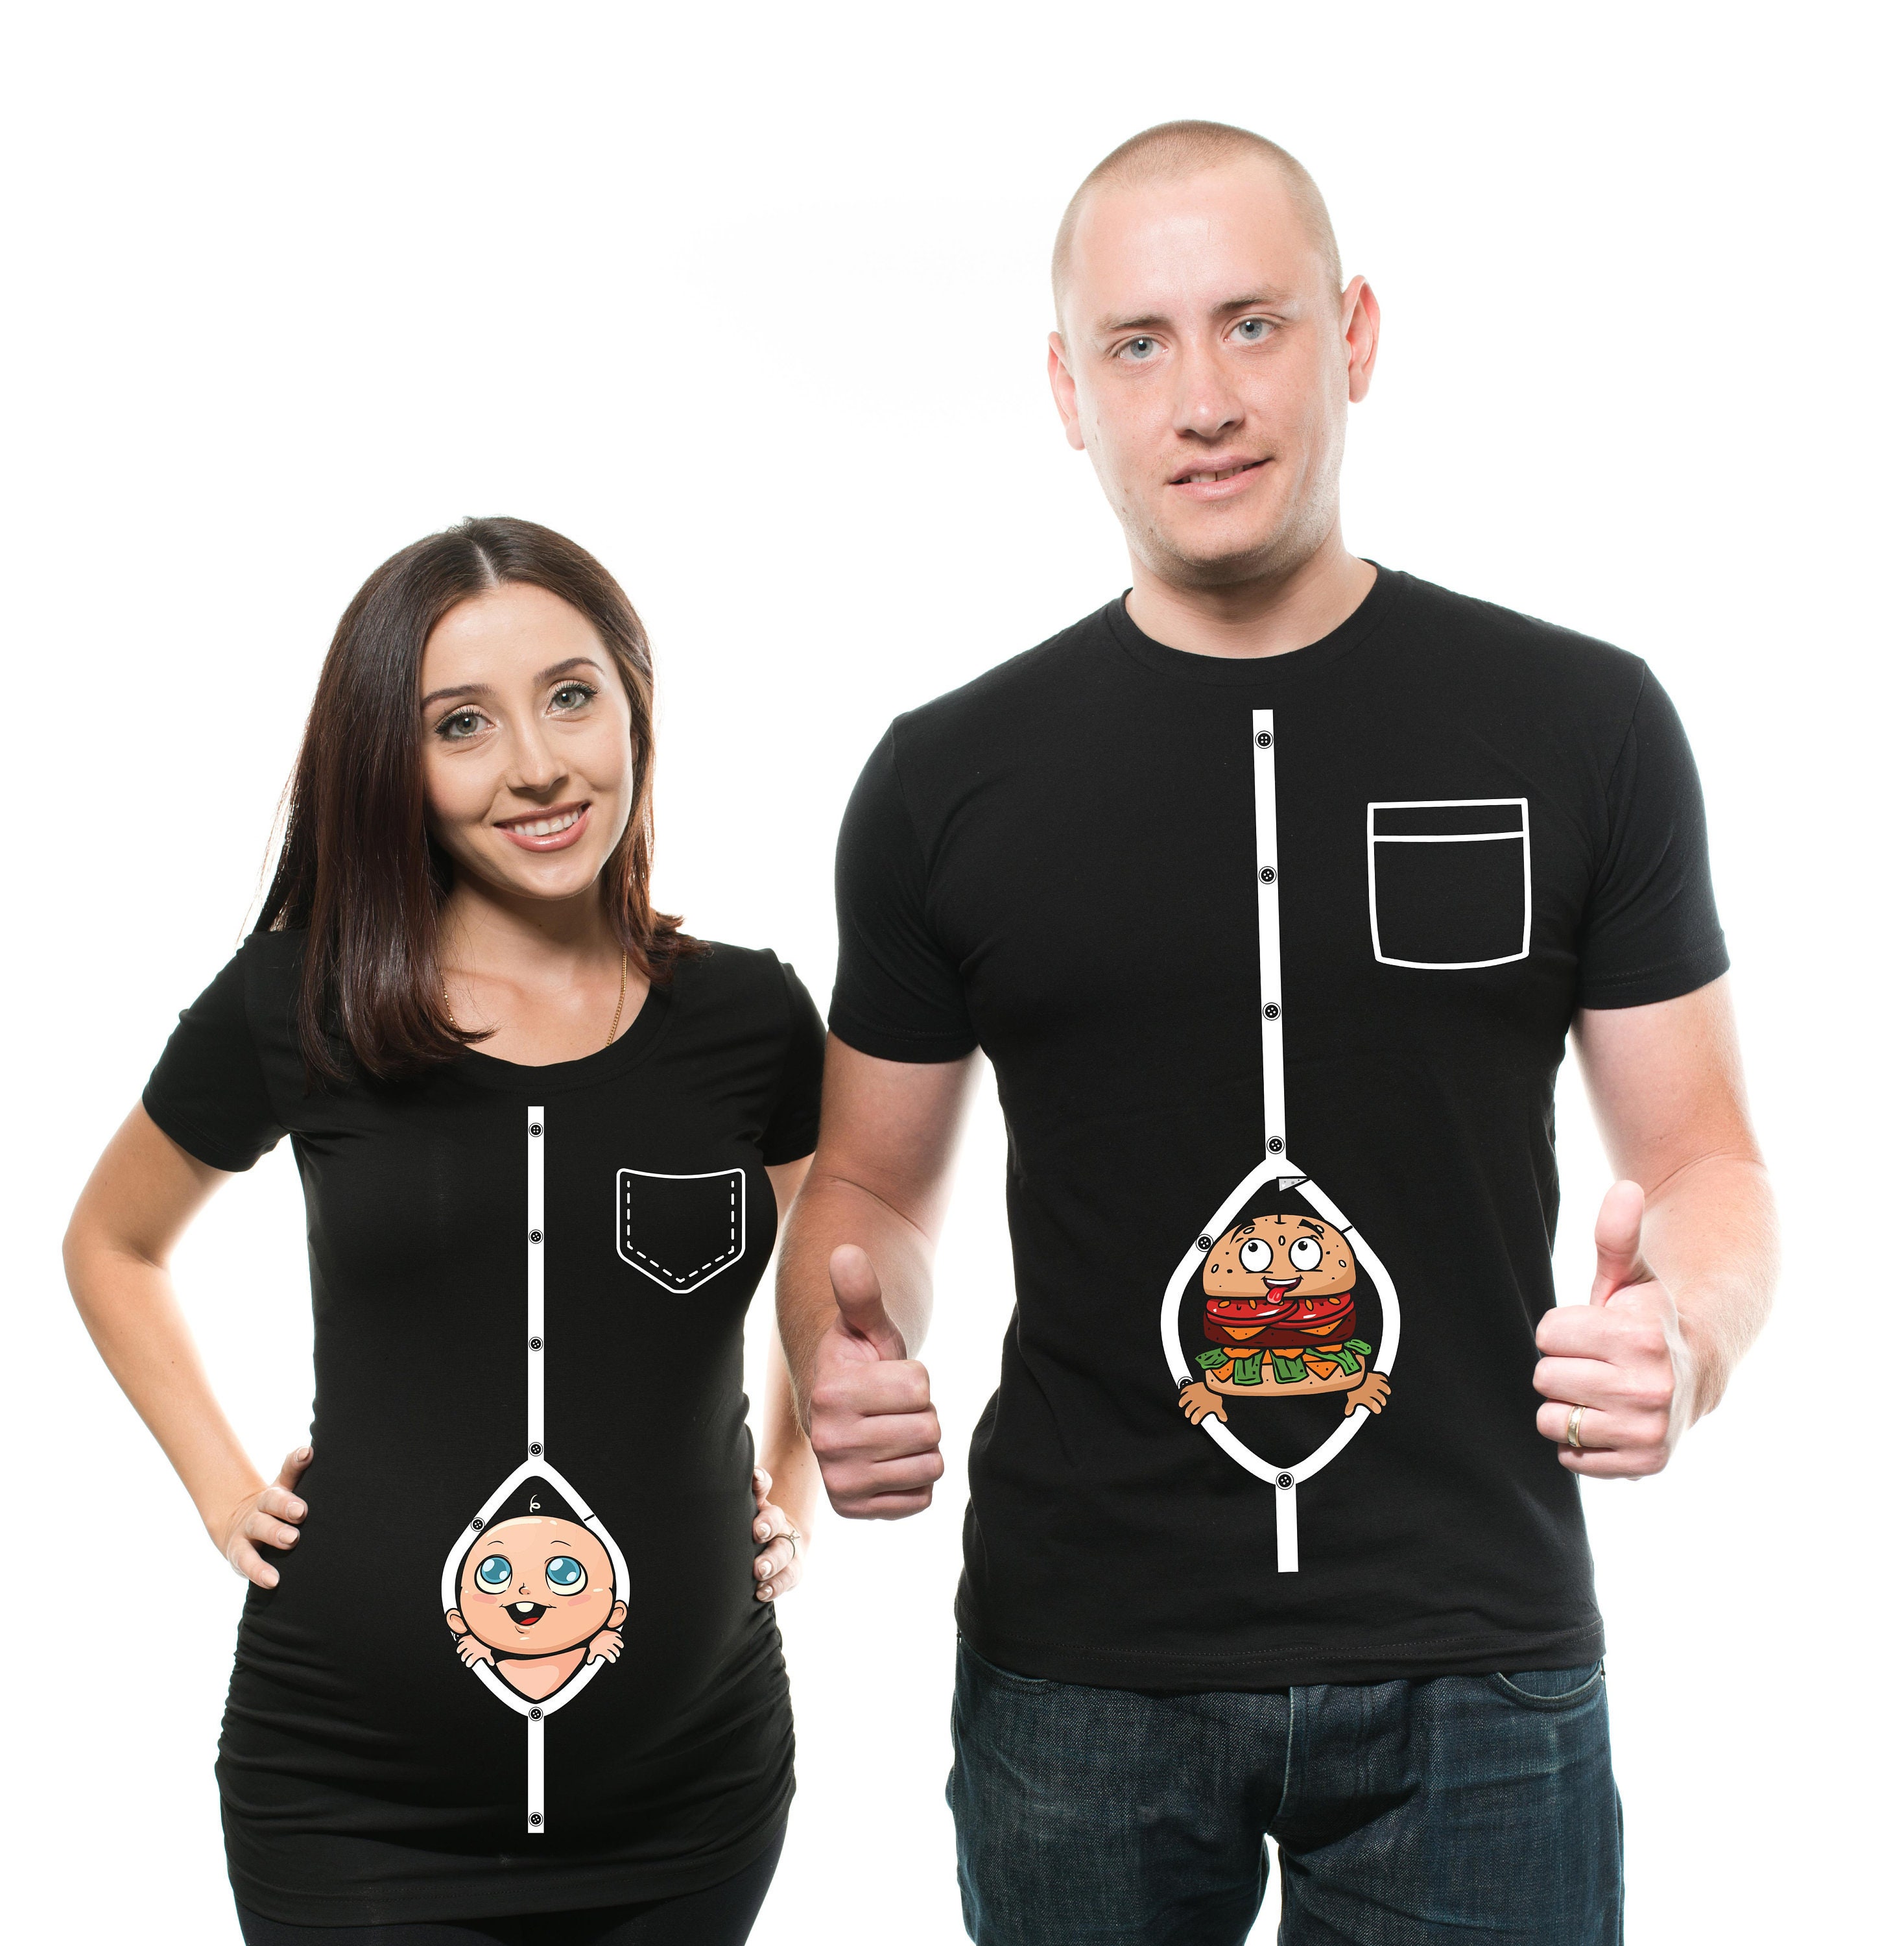 pregnancy announcement funny pregnancy shirts for couples